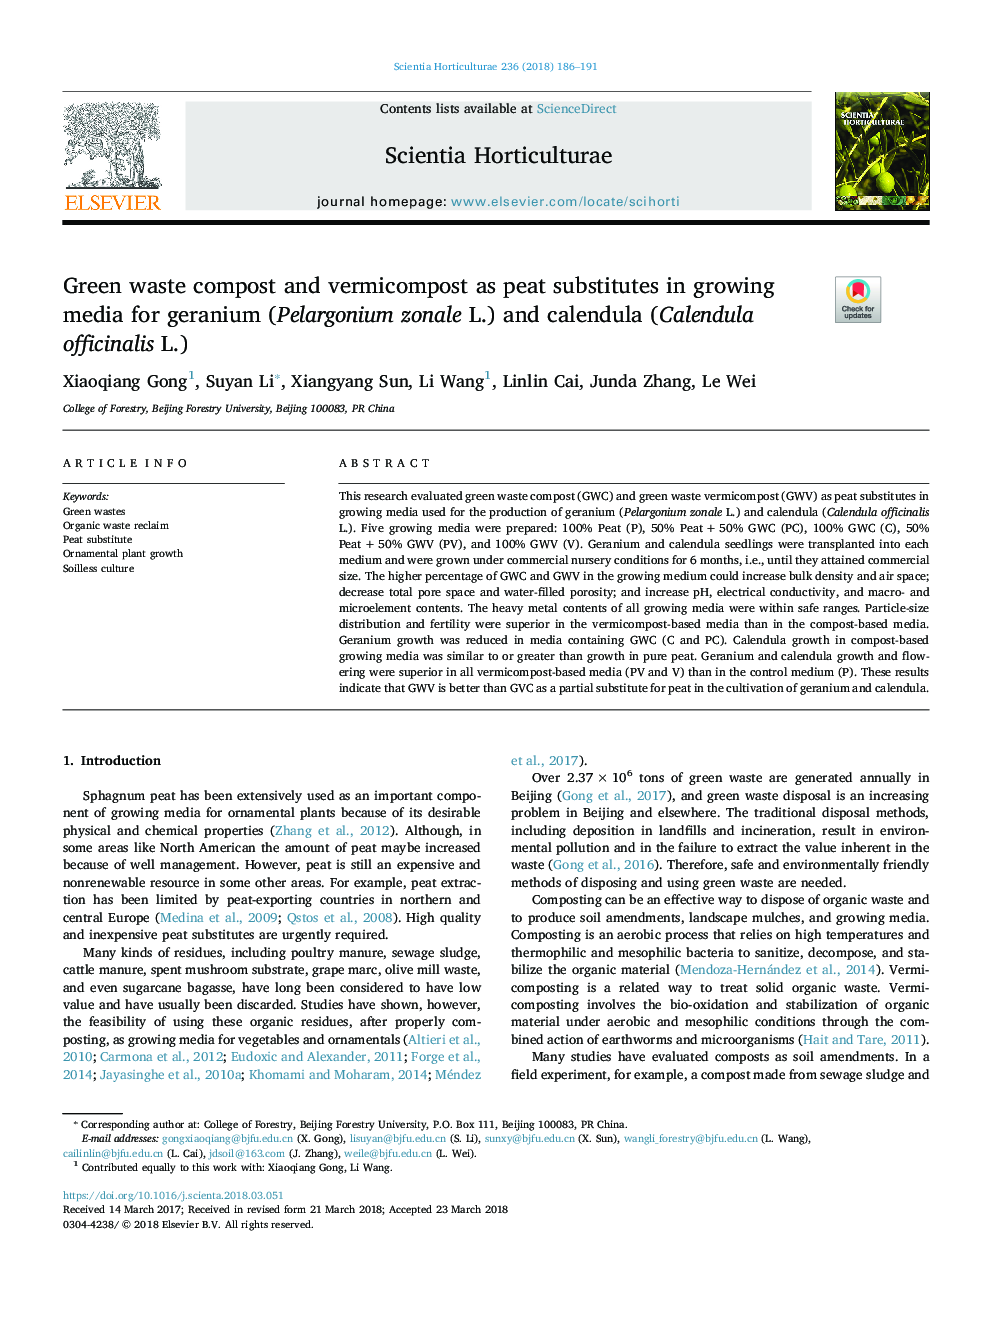 Green waste compost and vermicompost as peat substitutes in growing media for geranium (Pelargonium zonale L.) and calendula (Calendula officinalis L.)